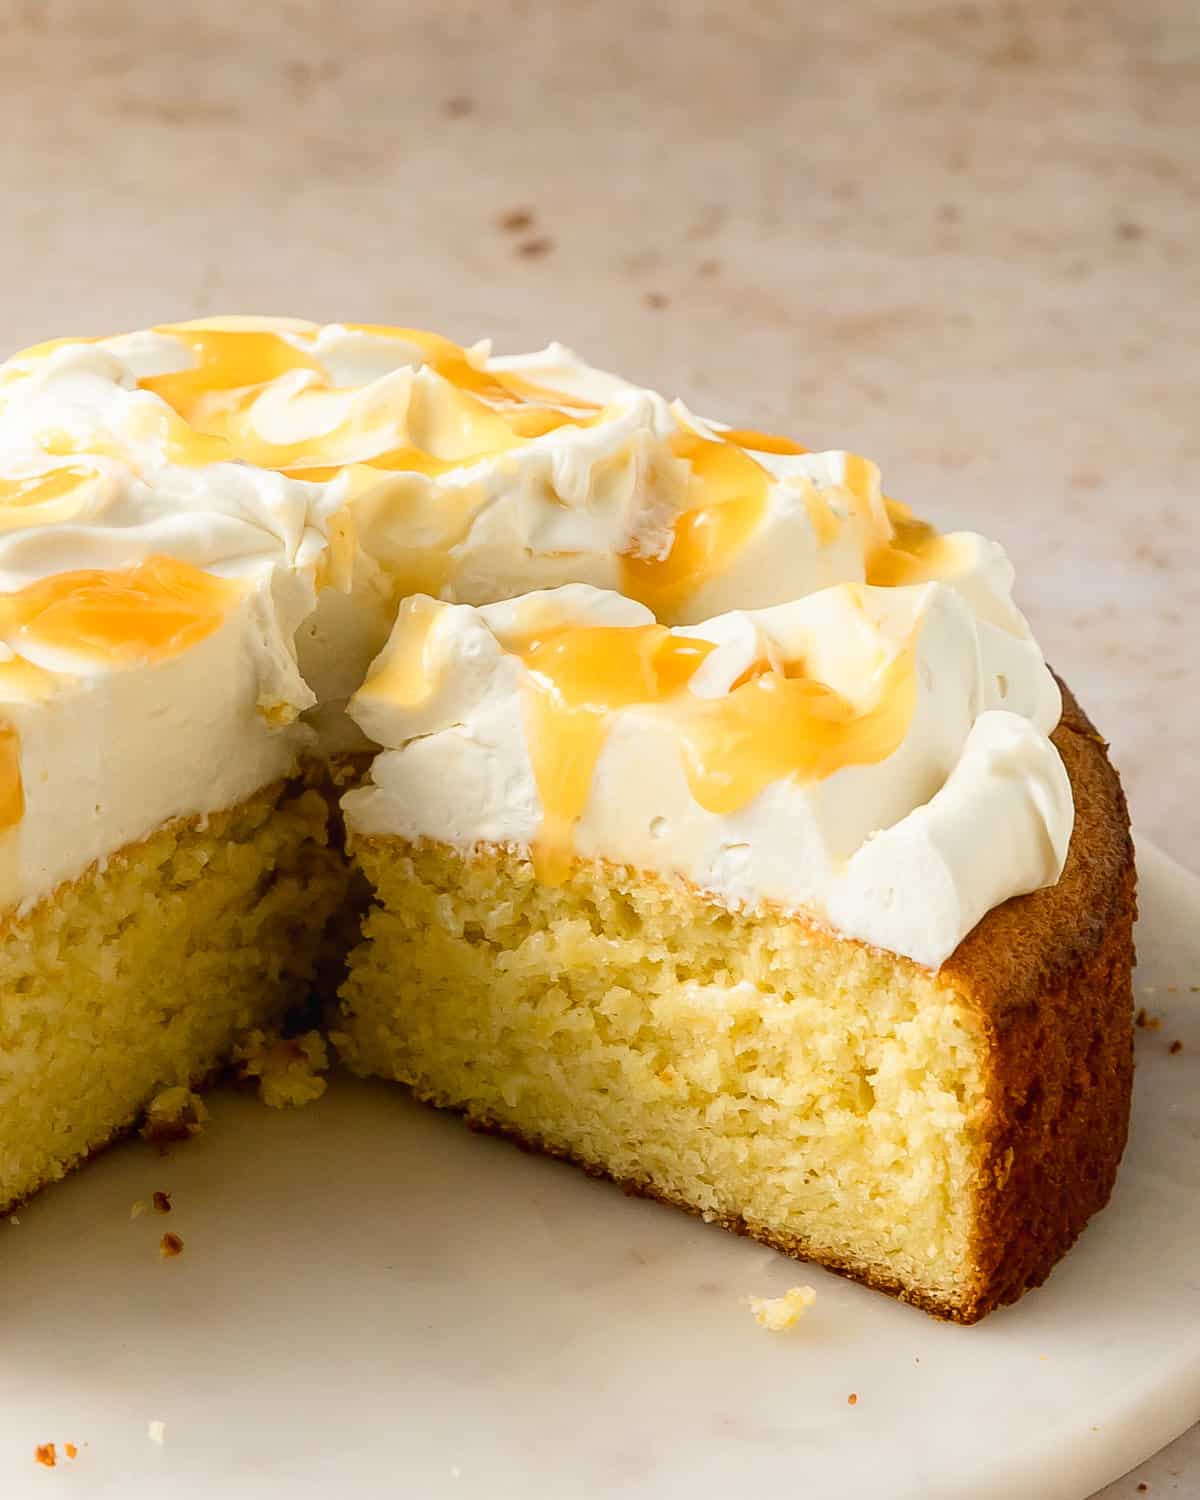 Limoncello mascarpone cake is a deliciously soft and tender lemon cake infused with limoncello liqueur flavor. This Italian lemon cake is topped with a rich and creamy mascarpone frosting and tart lemon curd. Make this limoncello cake anytime you need a simple, but stunning dessert.